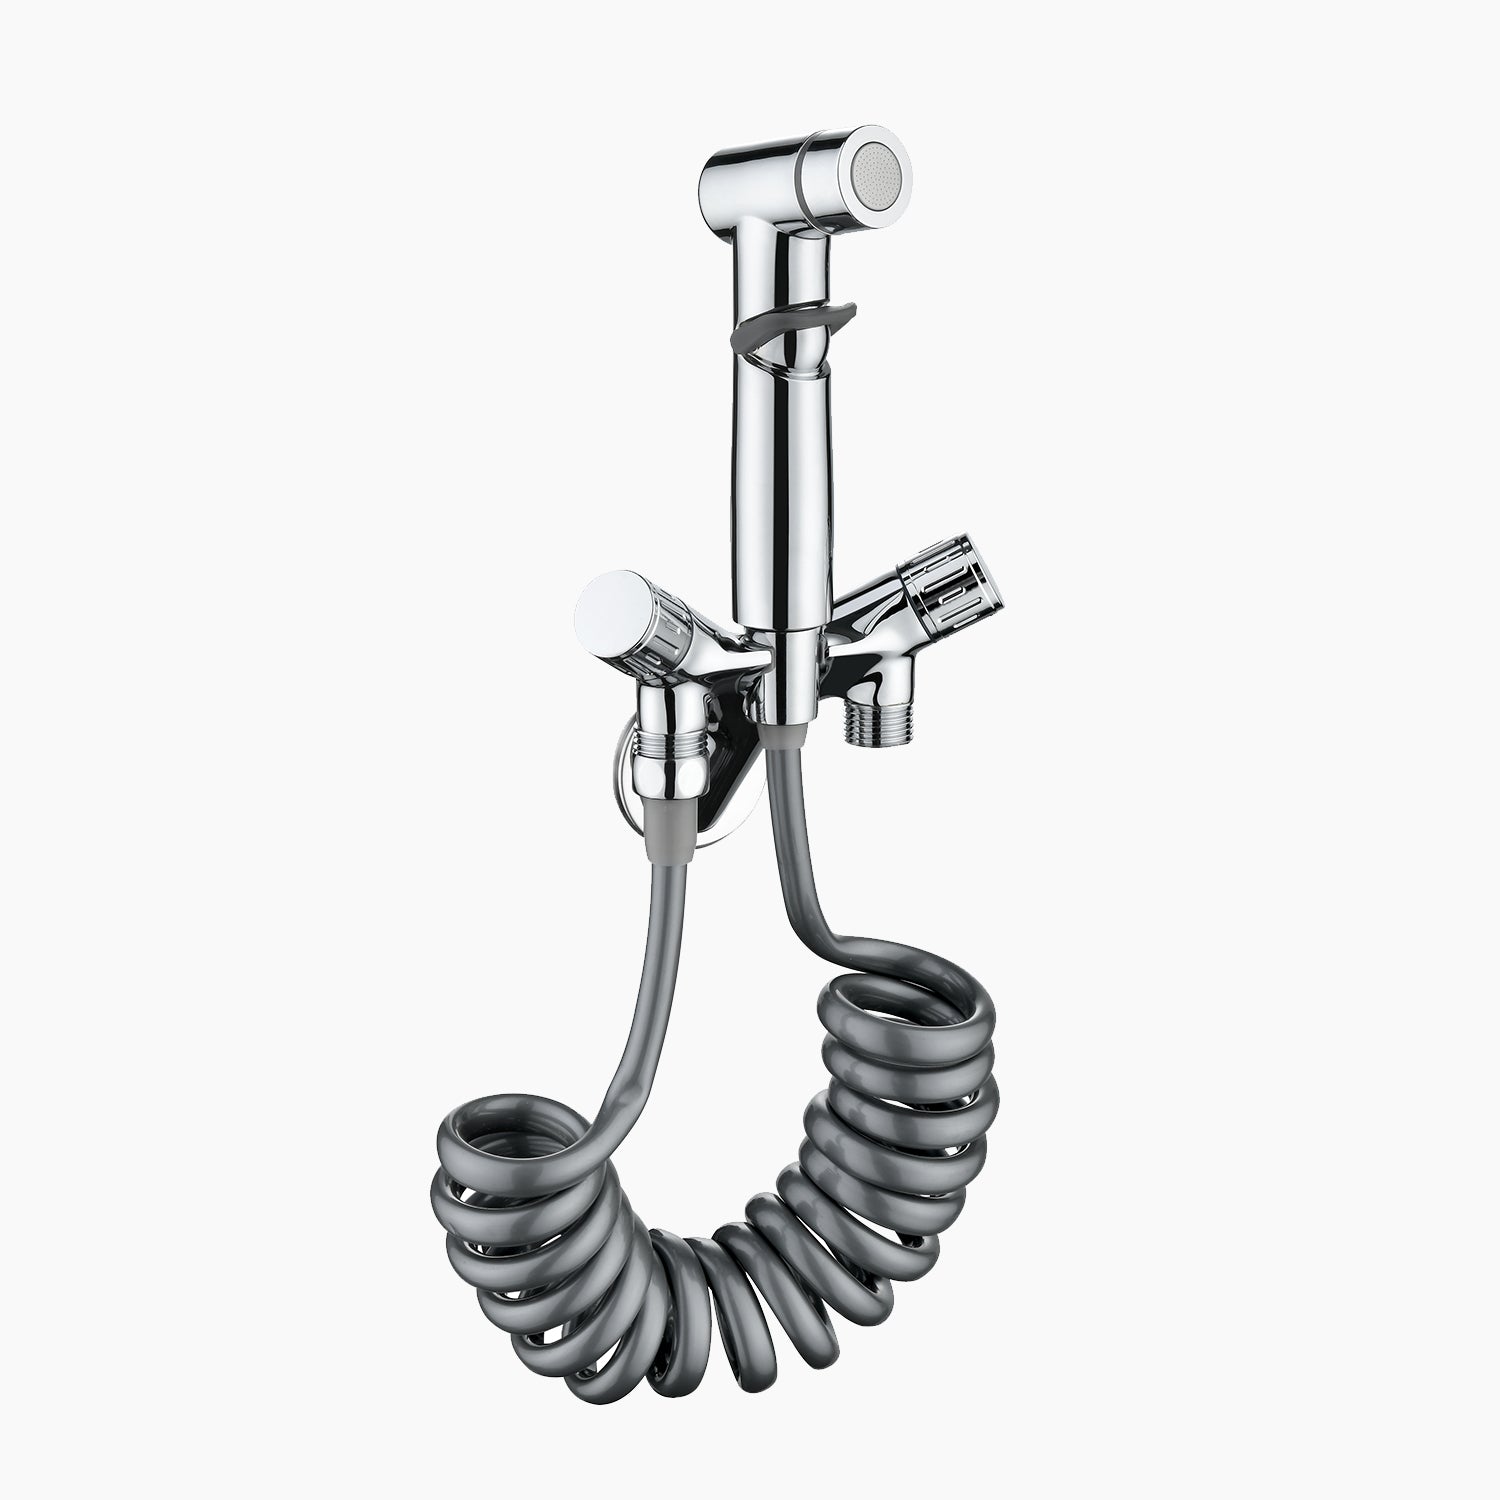 Lefton Toilet Sprayer Faucet with Angle Valve-BFS2201